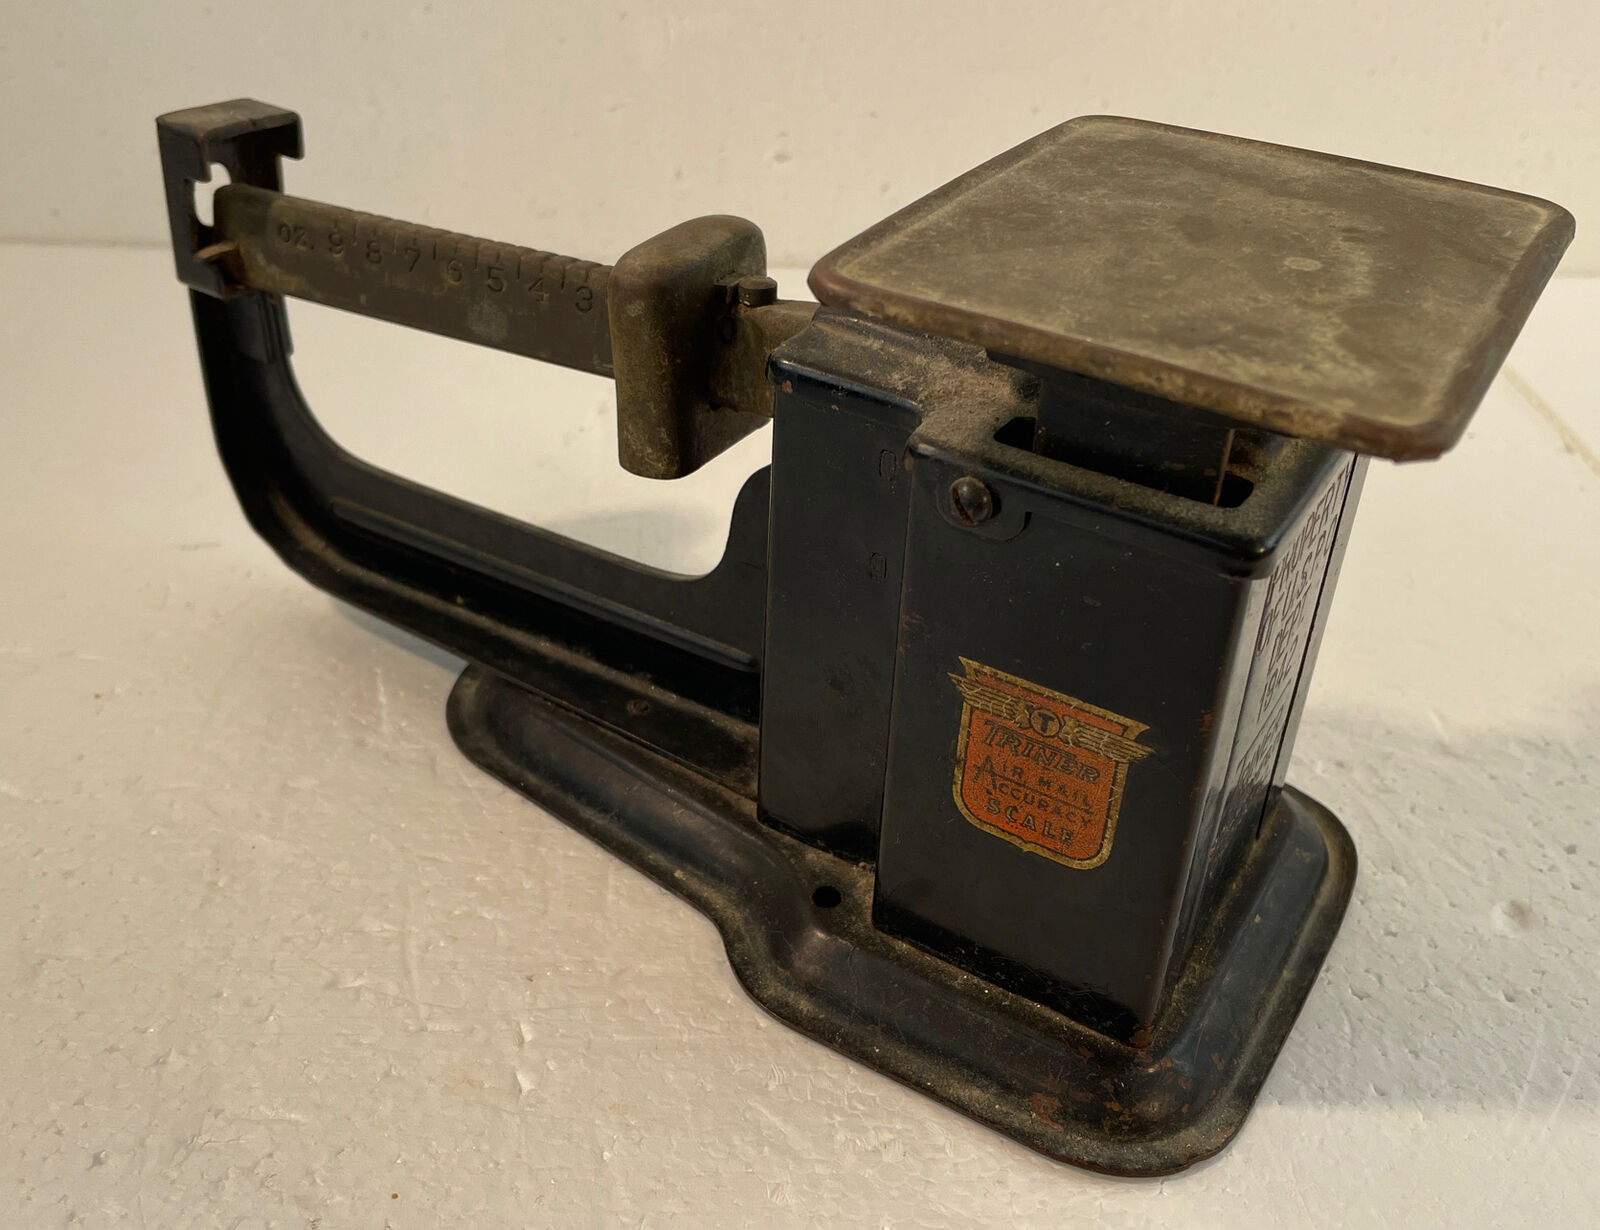 1942 Postal Scale Triner Air Mail Accuracy Scale from Chicago